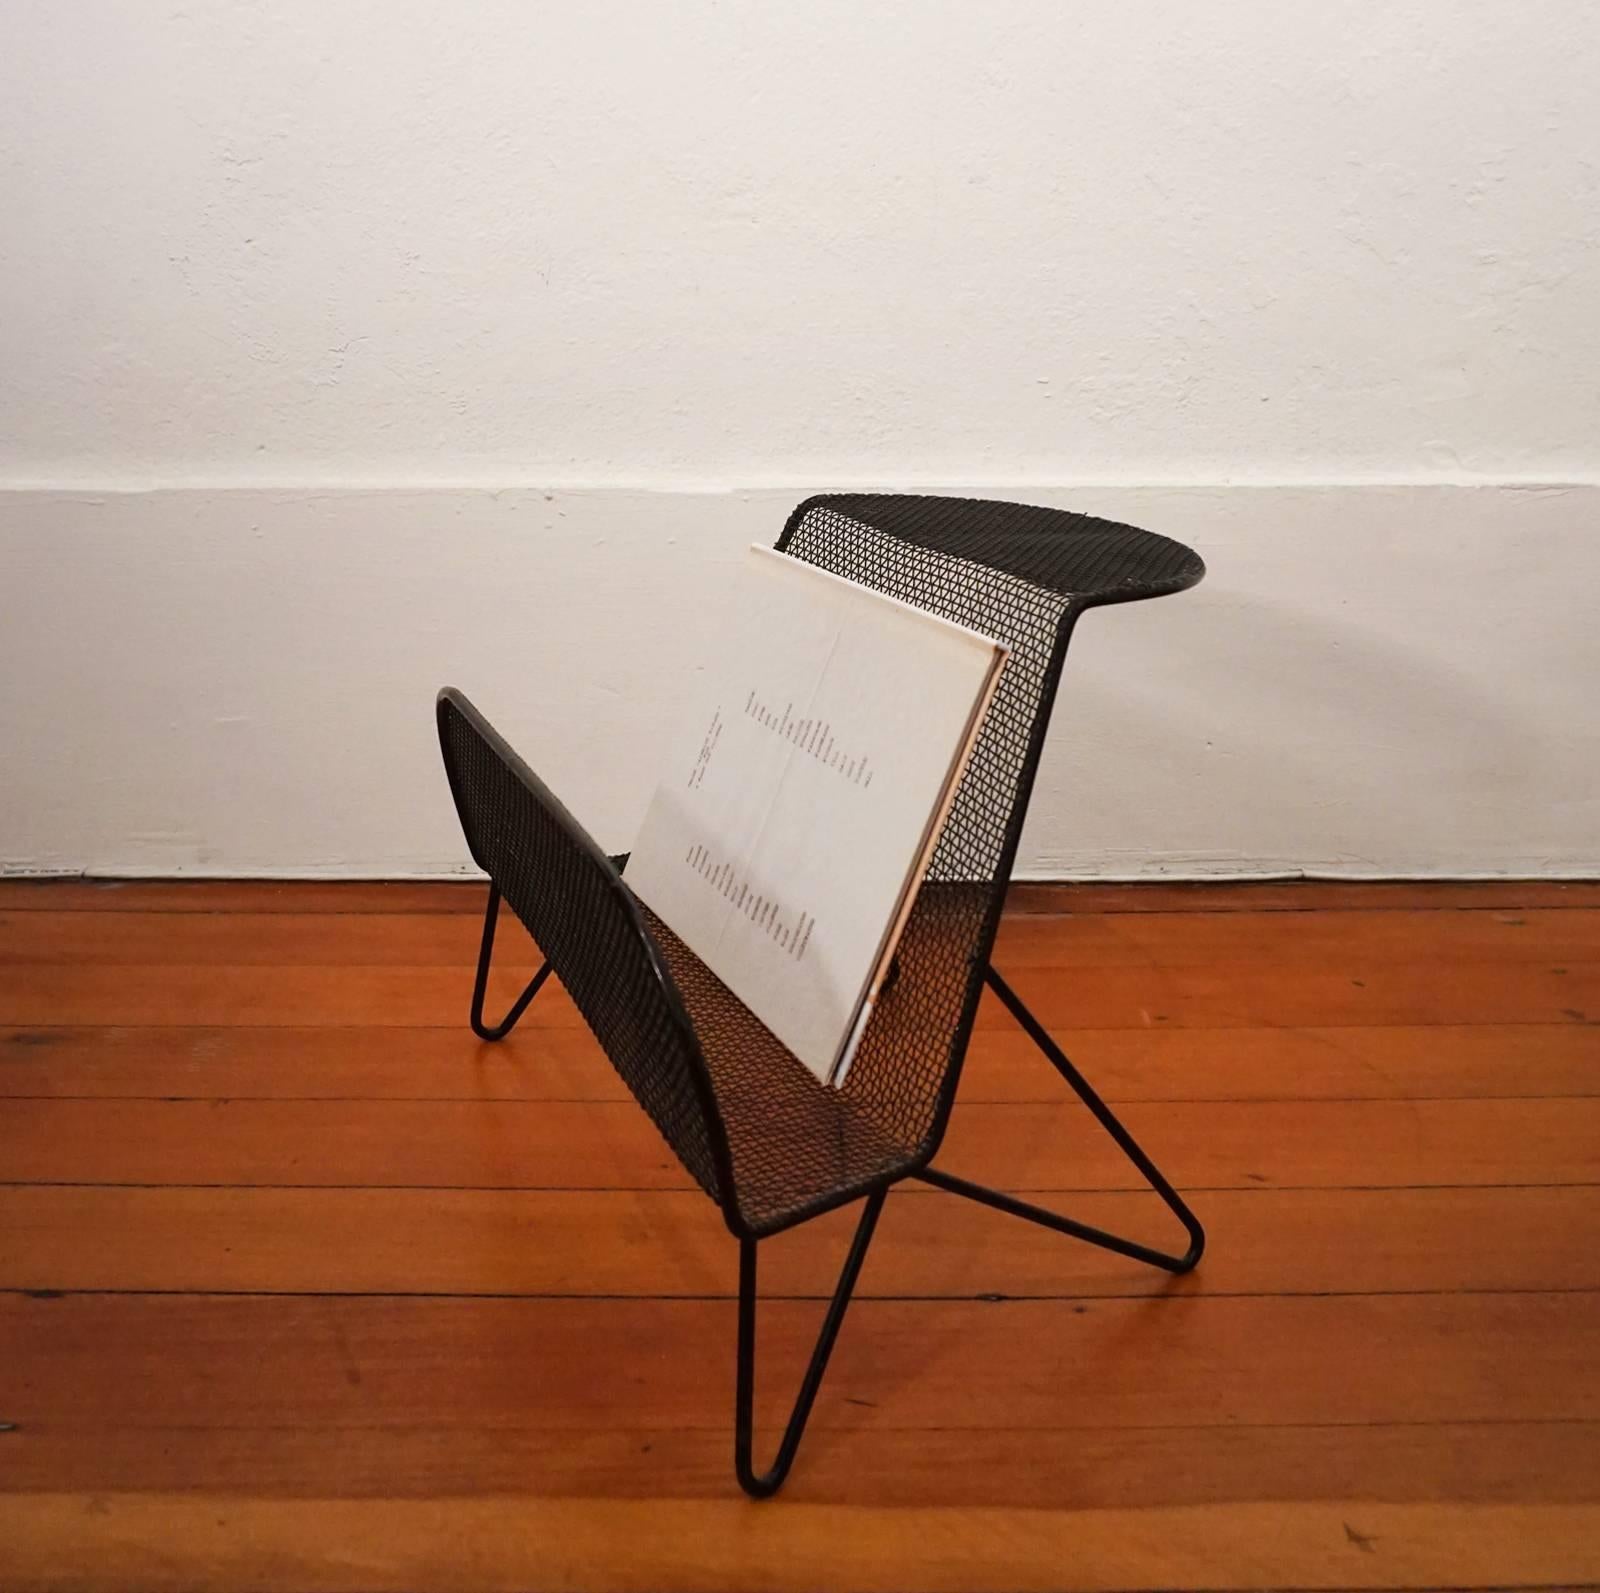 Magazine Rack by Sol Bloom for New Dimensions 1